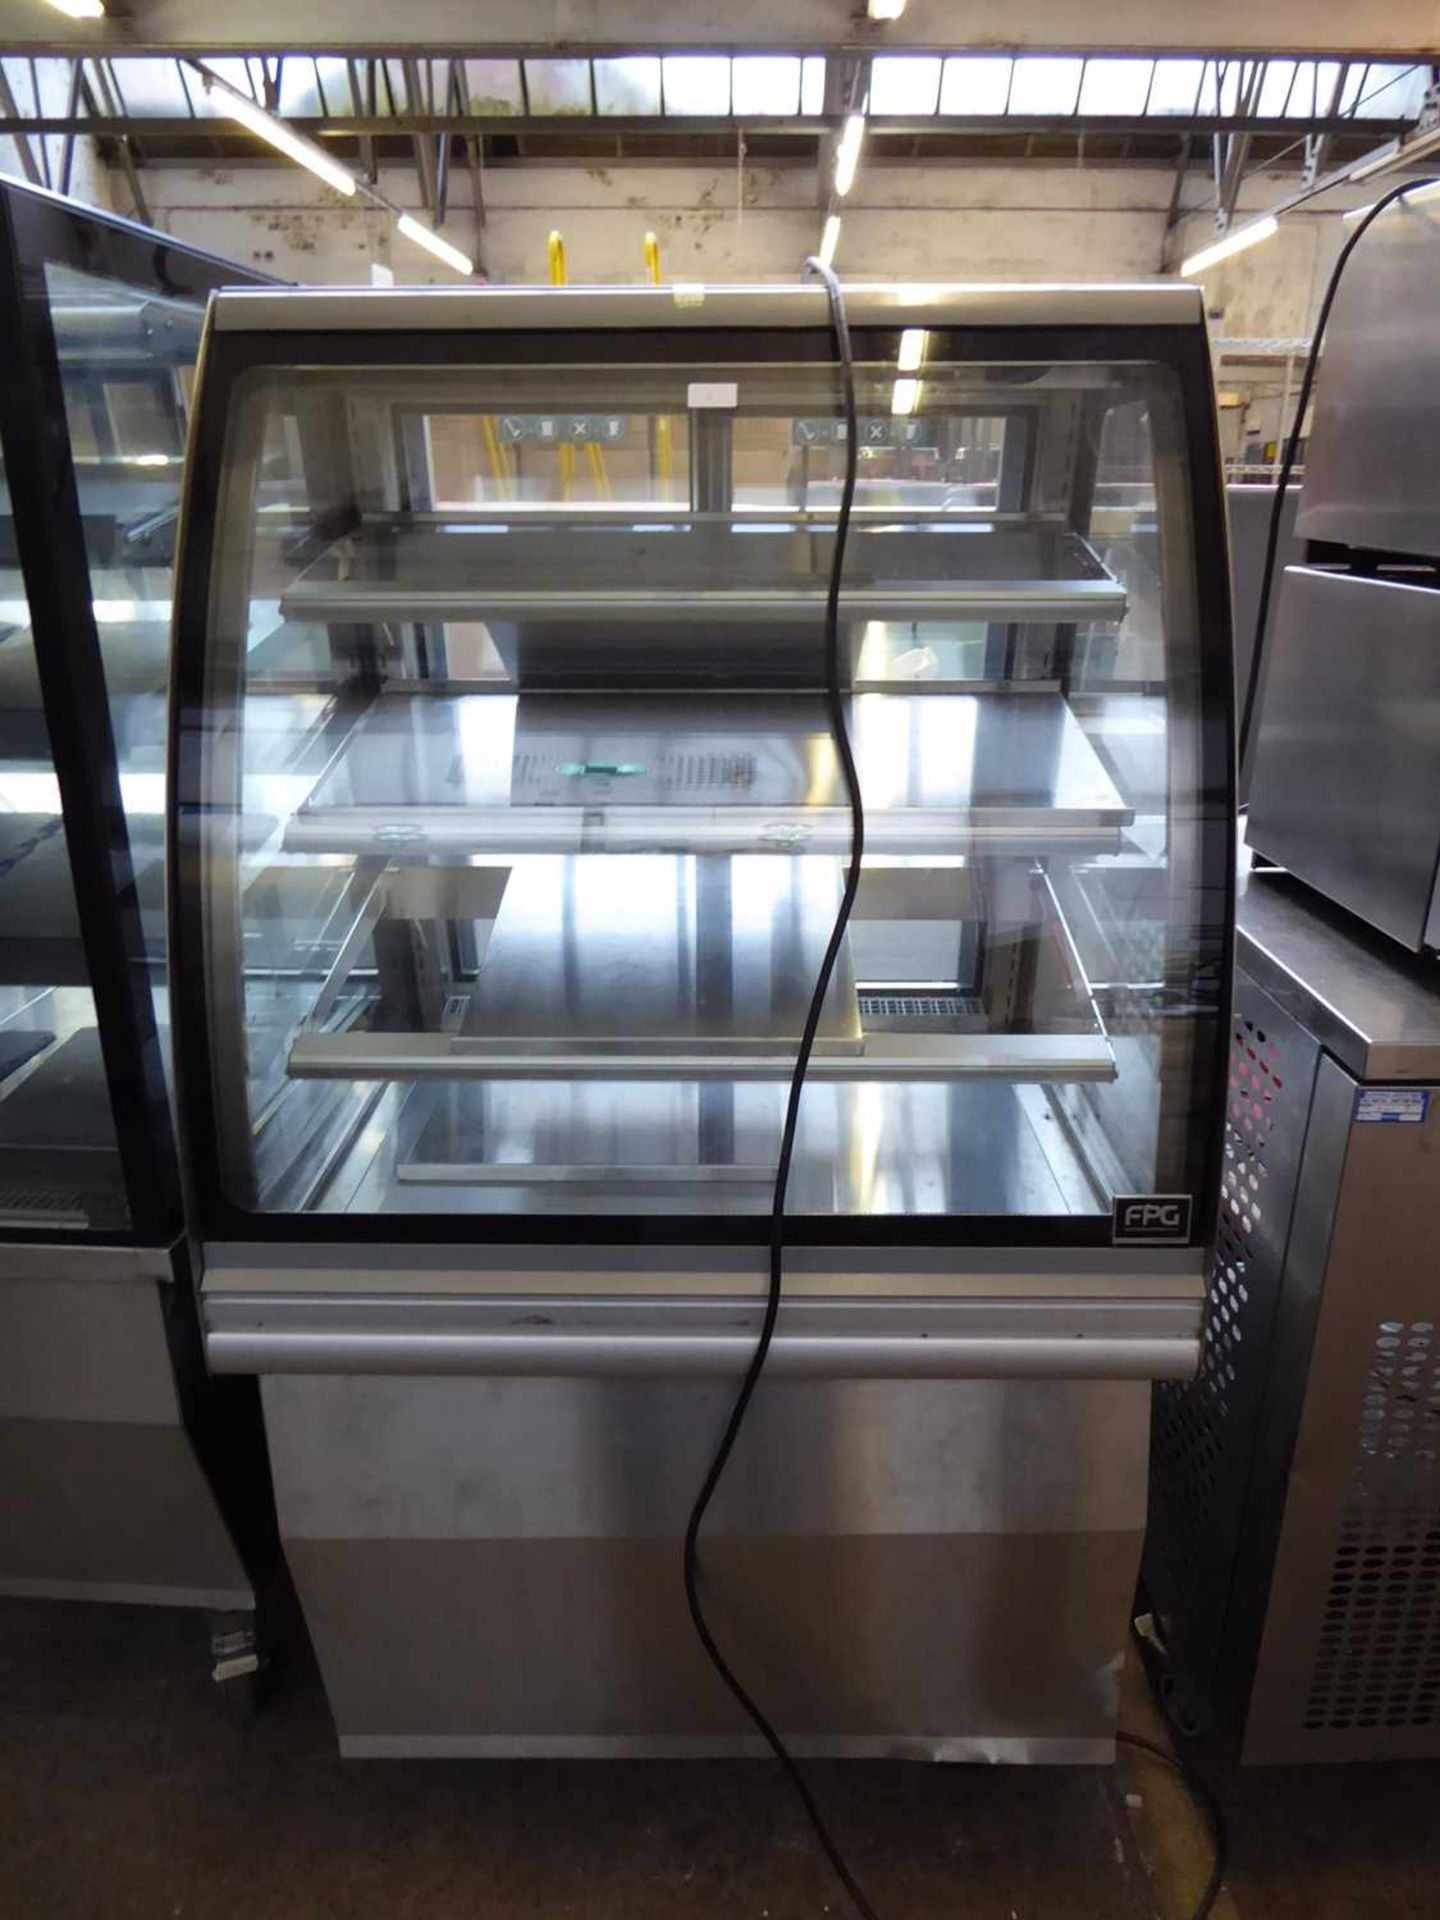 81cm FPG model: INLINE5000 refrigerated display server over cabinet (Gas R134A)